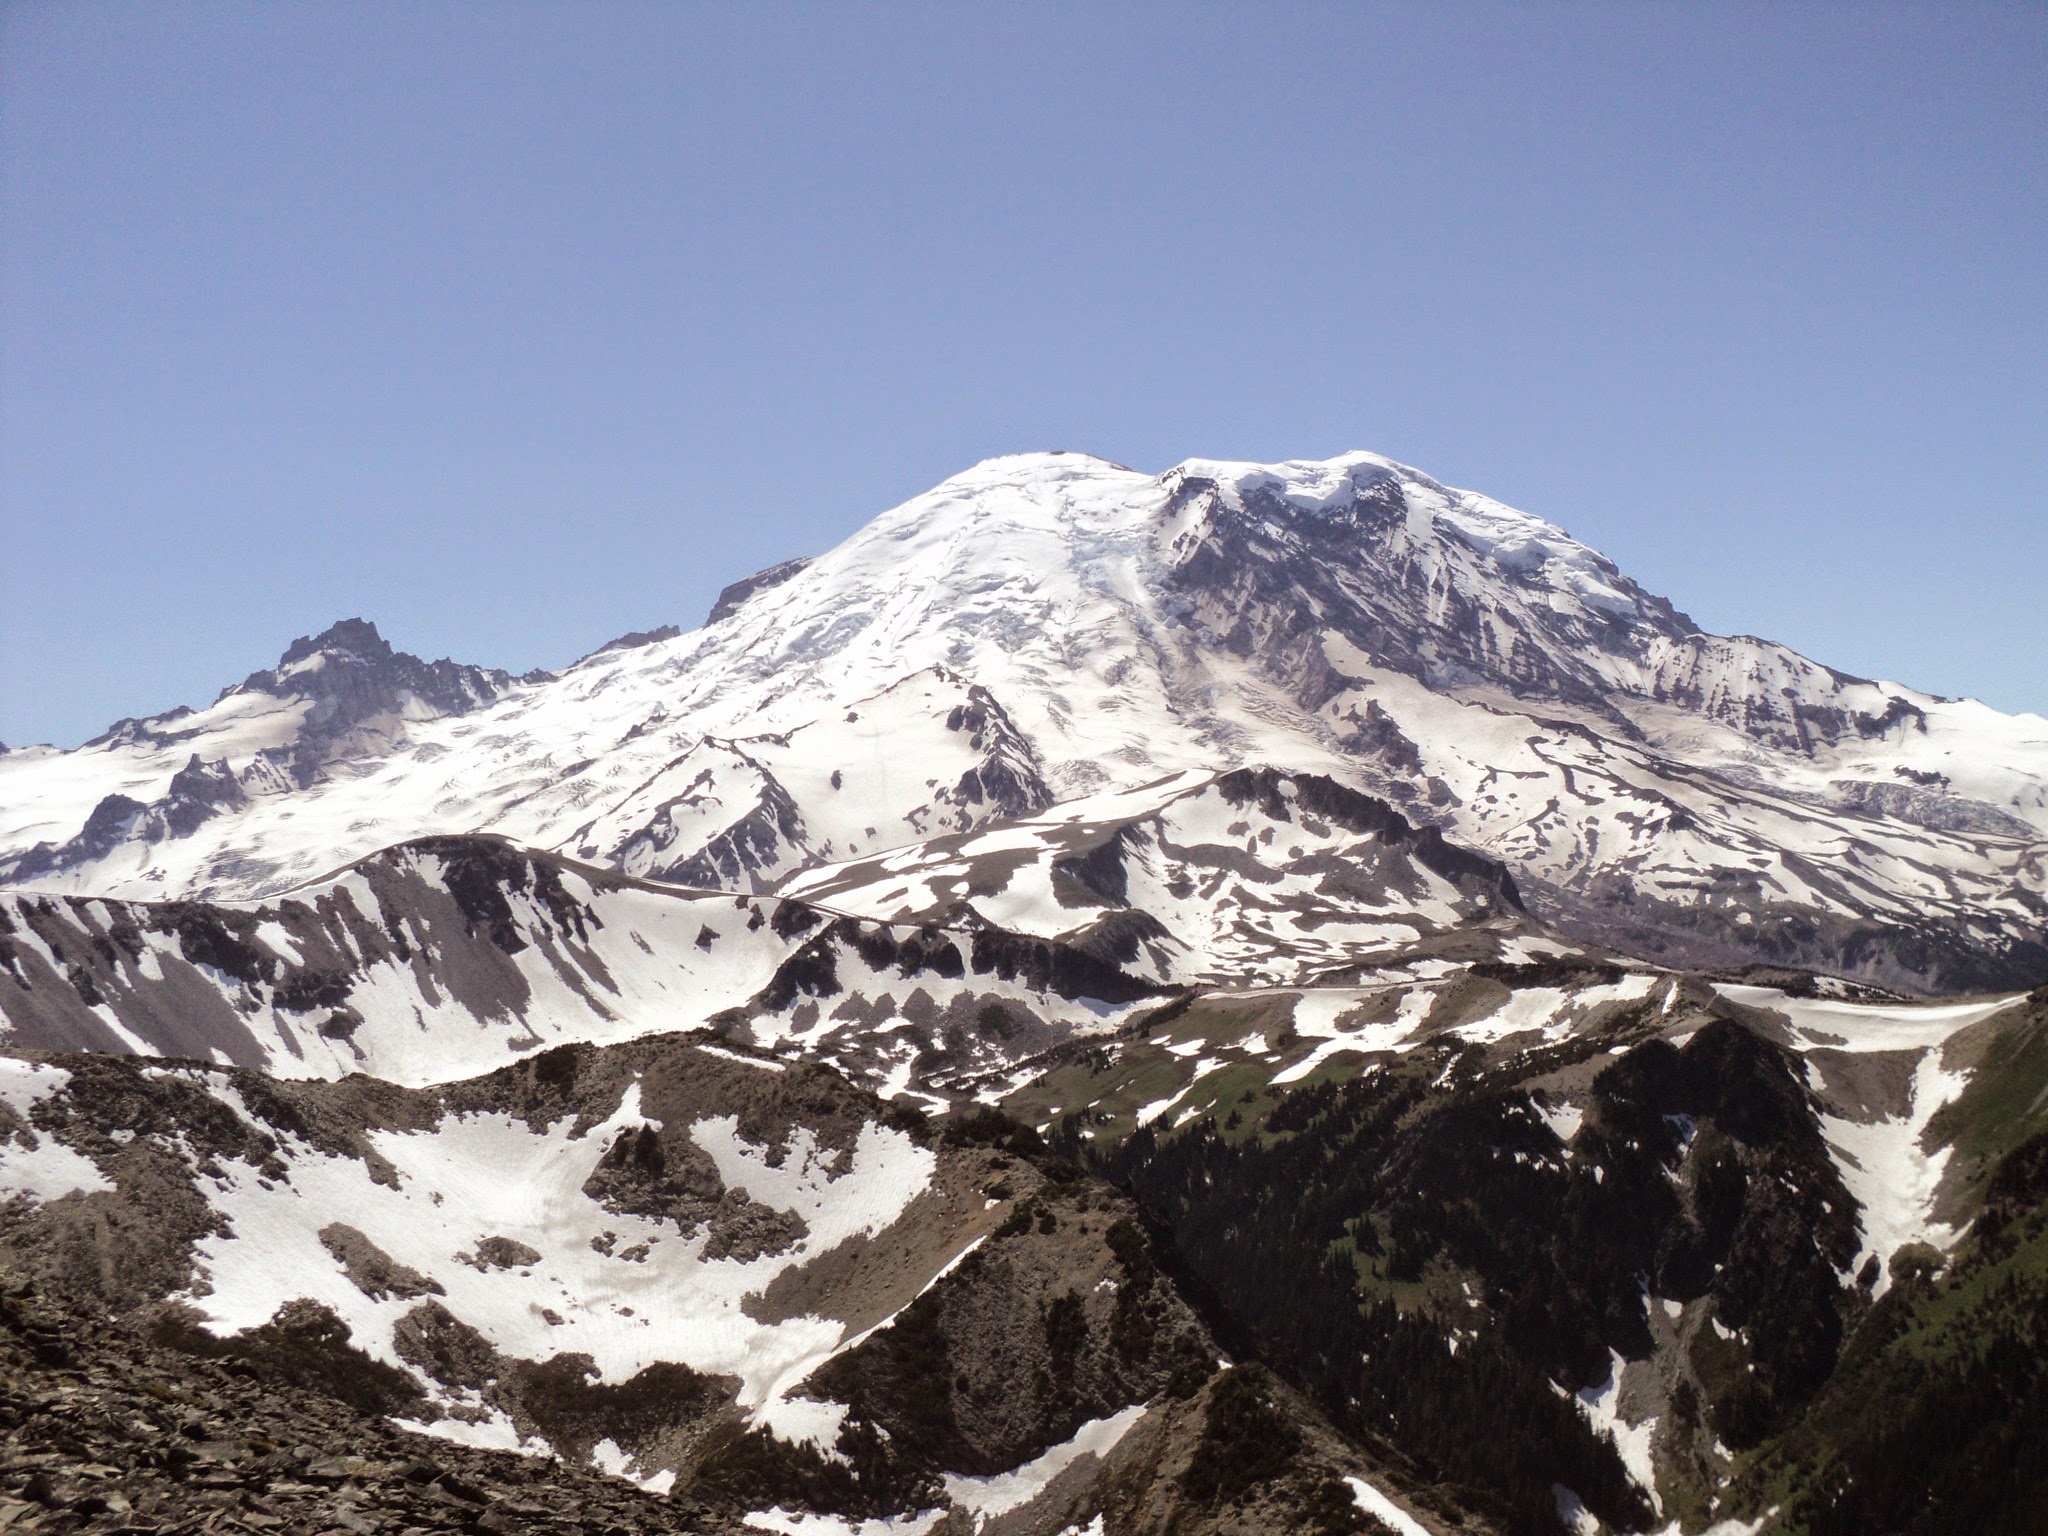 A view of Mt Rainier from the Mt Fremont hike on a clear day